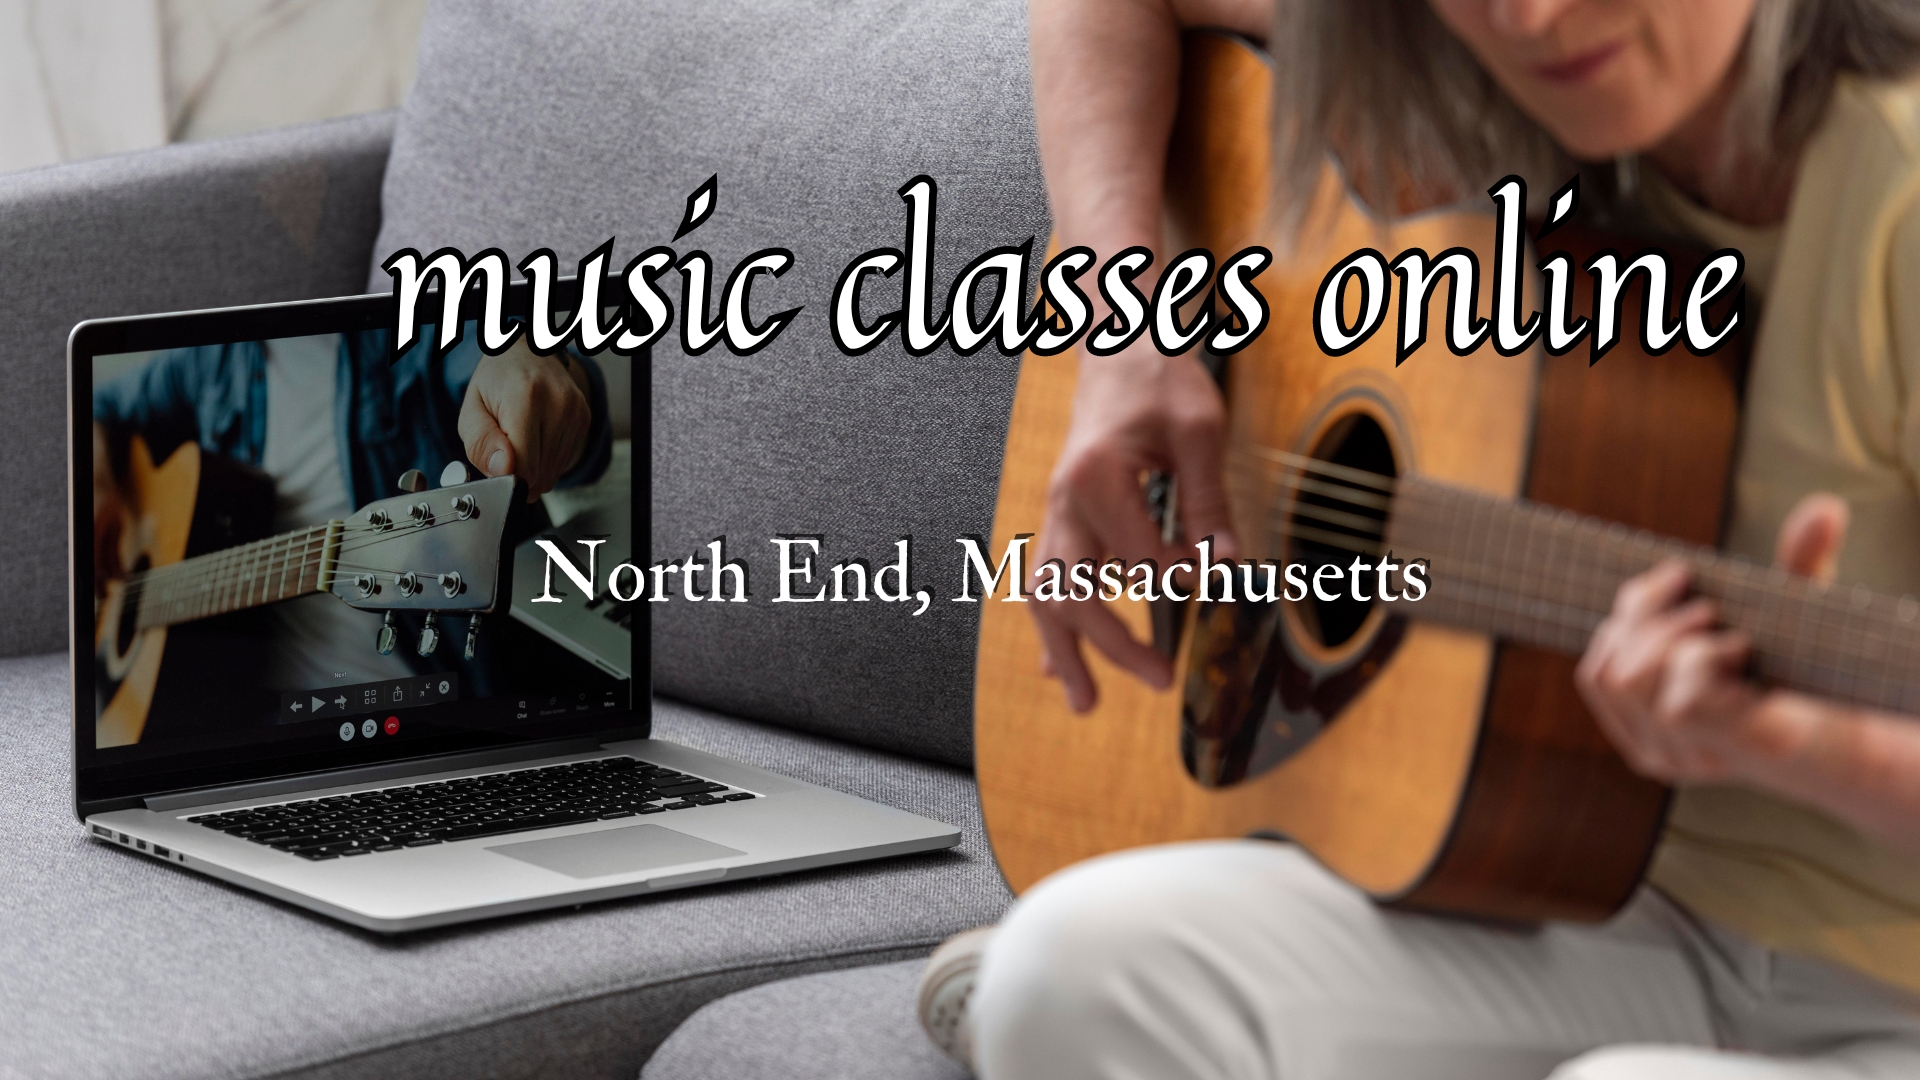 North End, Massachusetts: Unlock Your Musical Potential with Online Music Classes